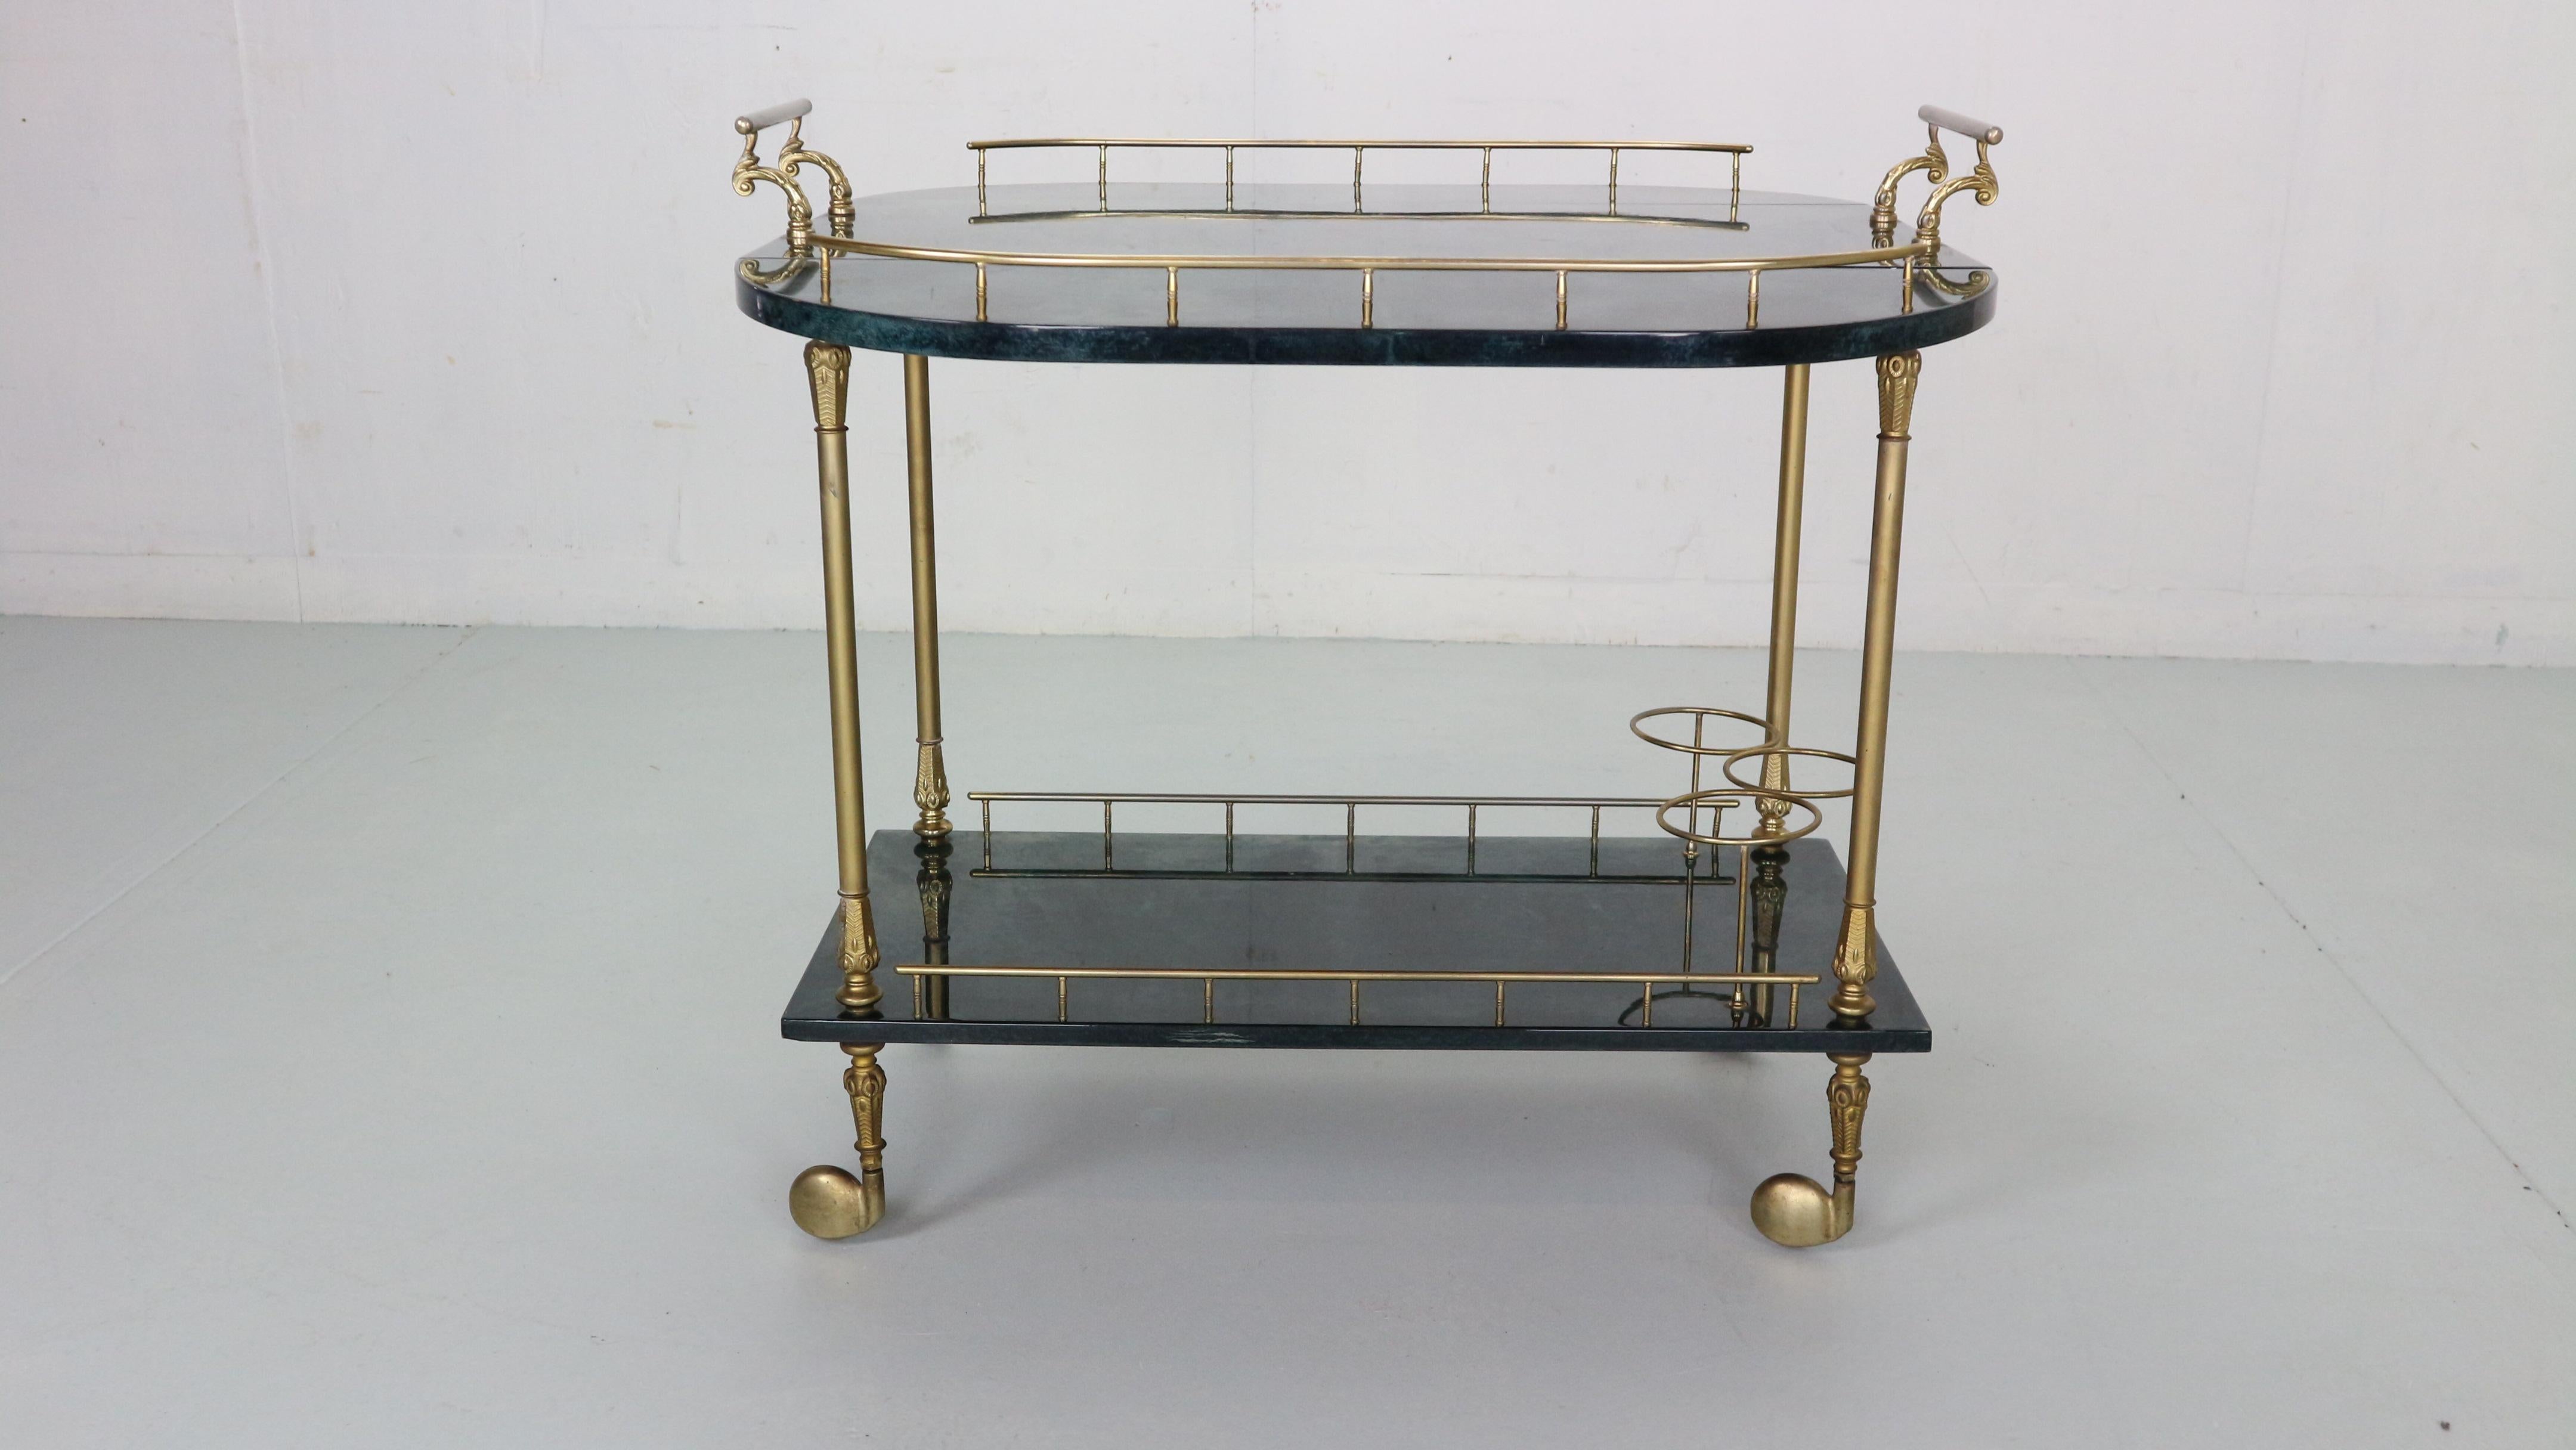 Magnificent bar cart/ trolley designed by Aldo Tura in 1950's period Italy.
Green colour bar cart is made of goat skin witch gives incredible green shades with brass elegant handles, wheels, feet, three bottle holders and details overall.
The top